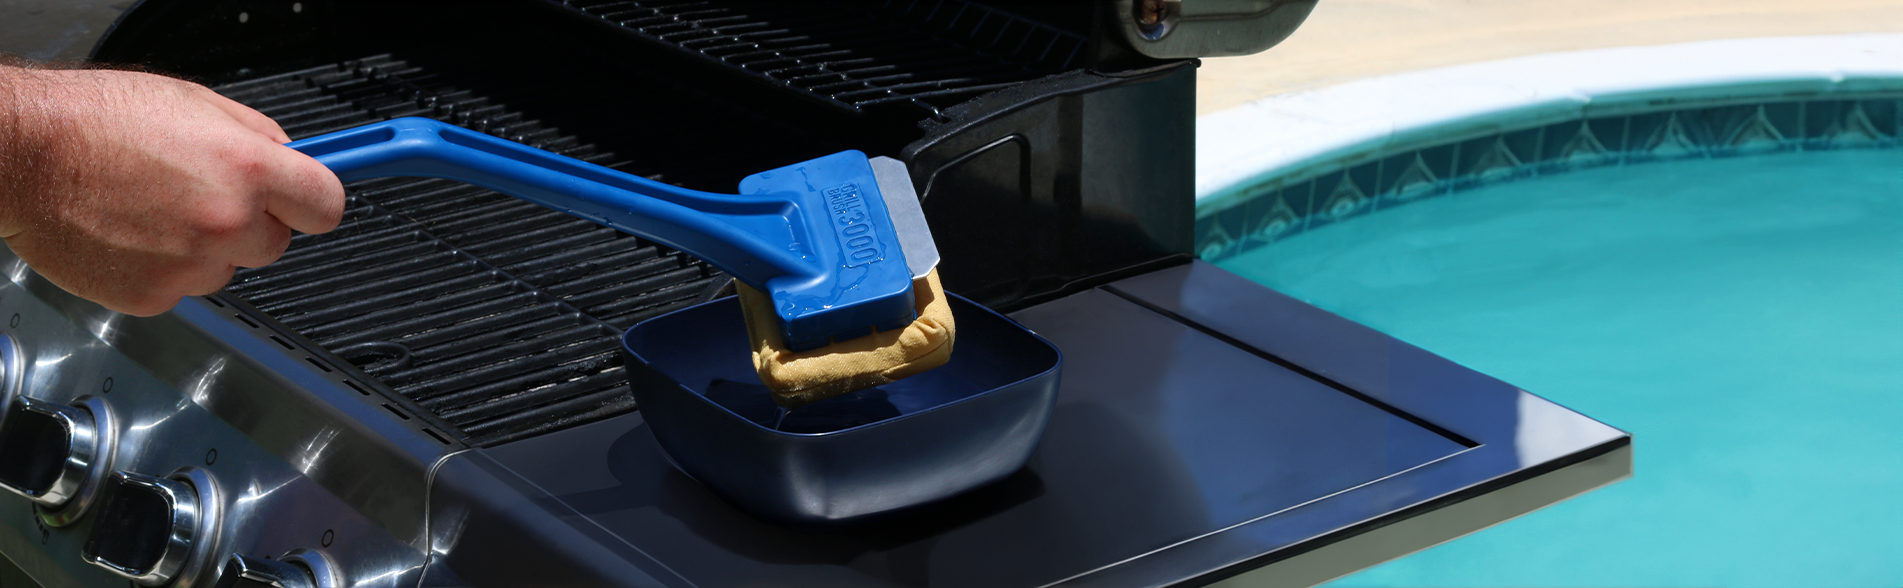 Grill Rescue Steam-Cleaning Grill Brush is the smarter way to